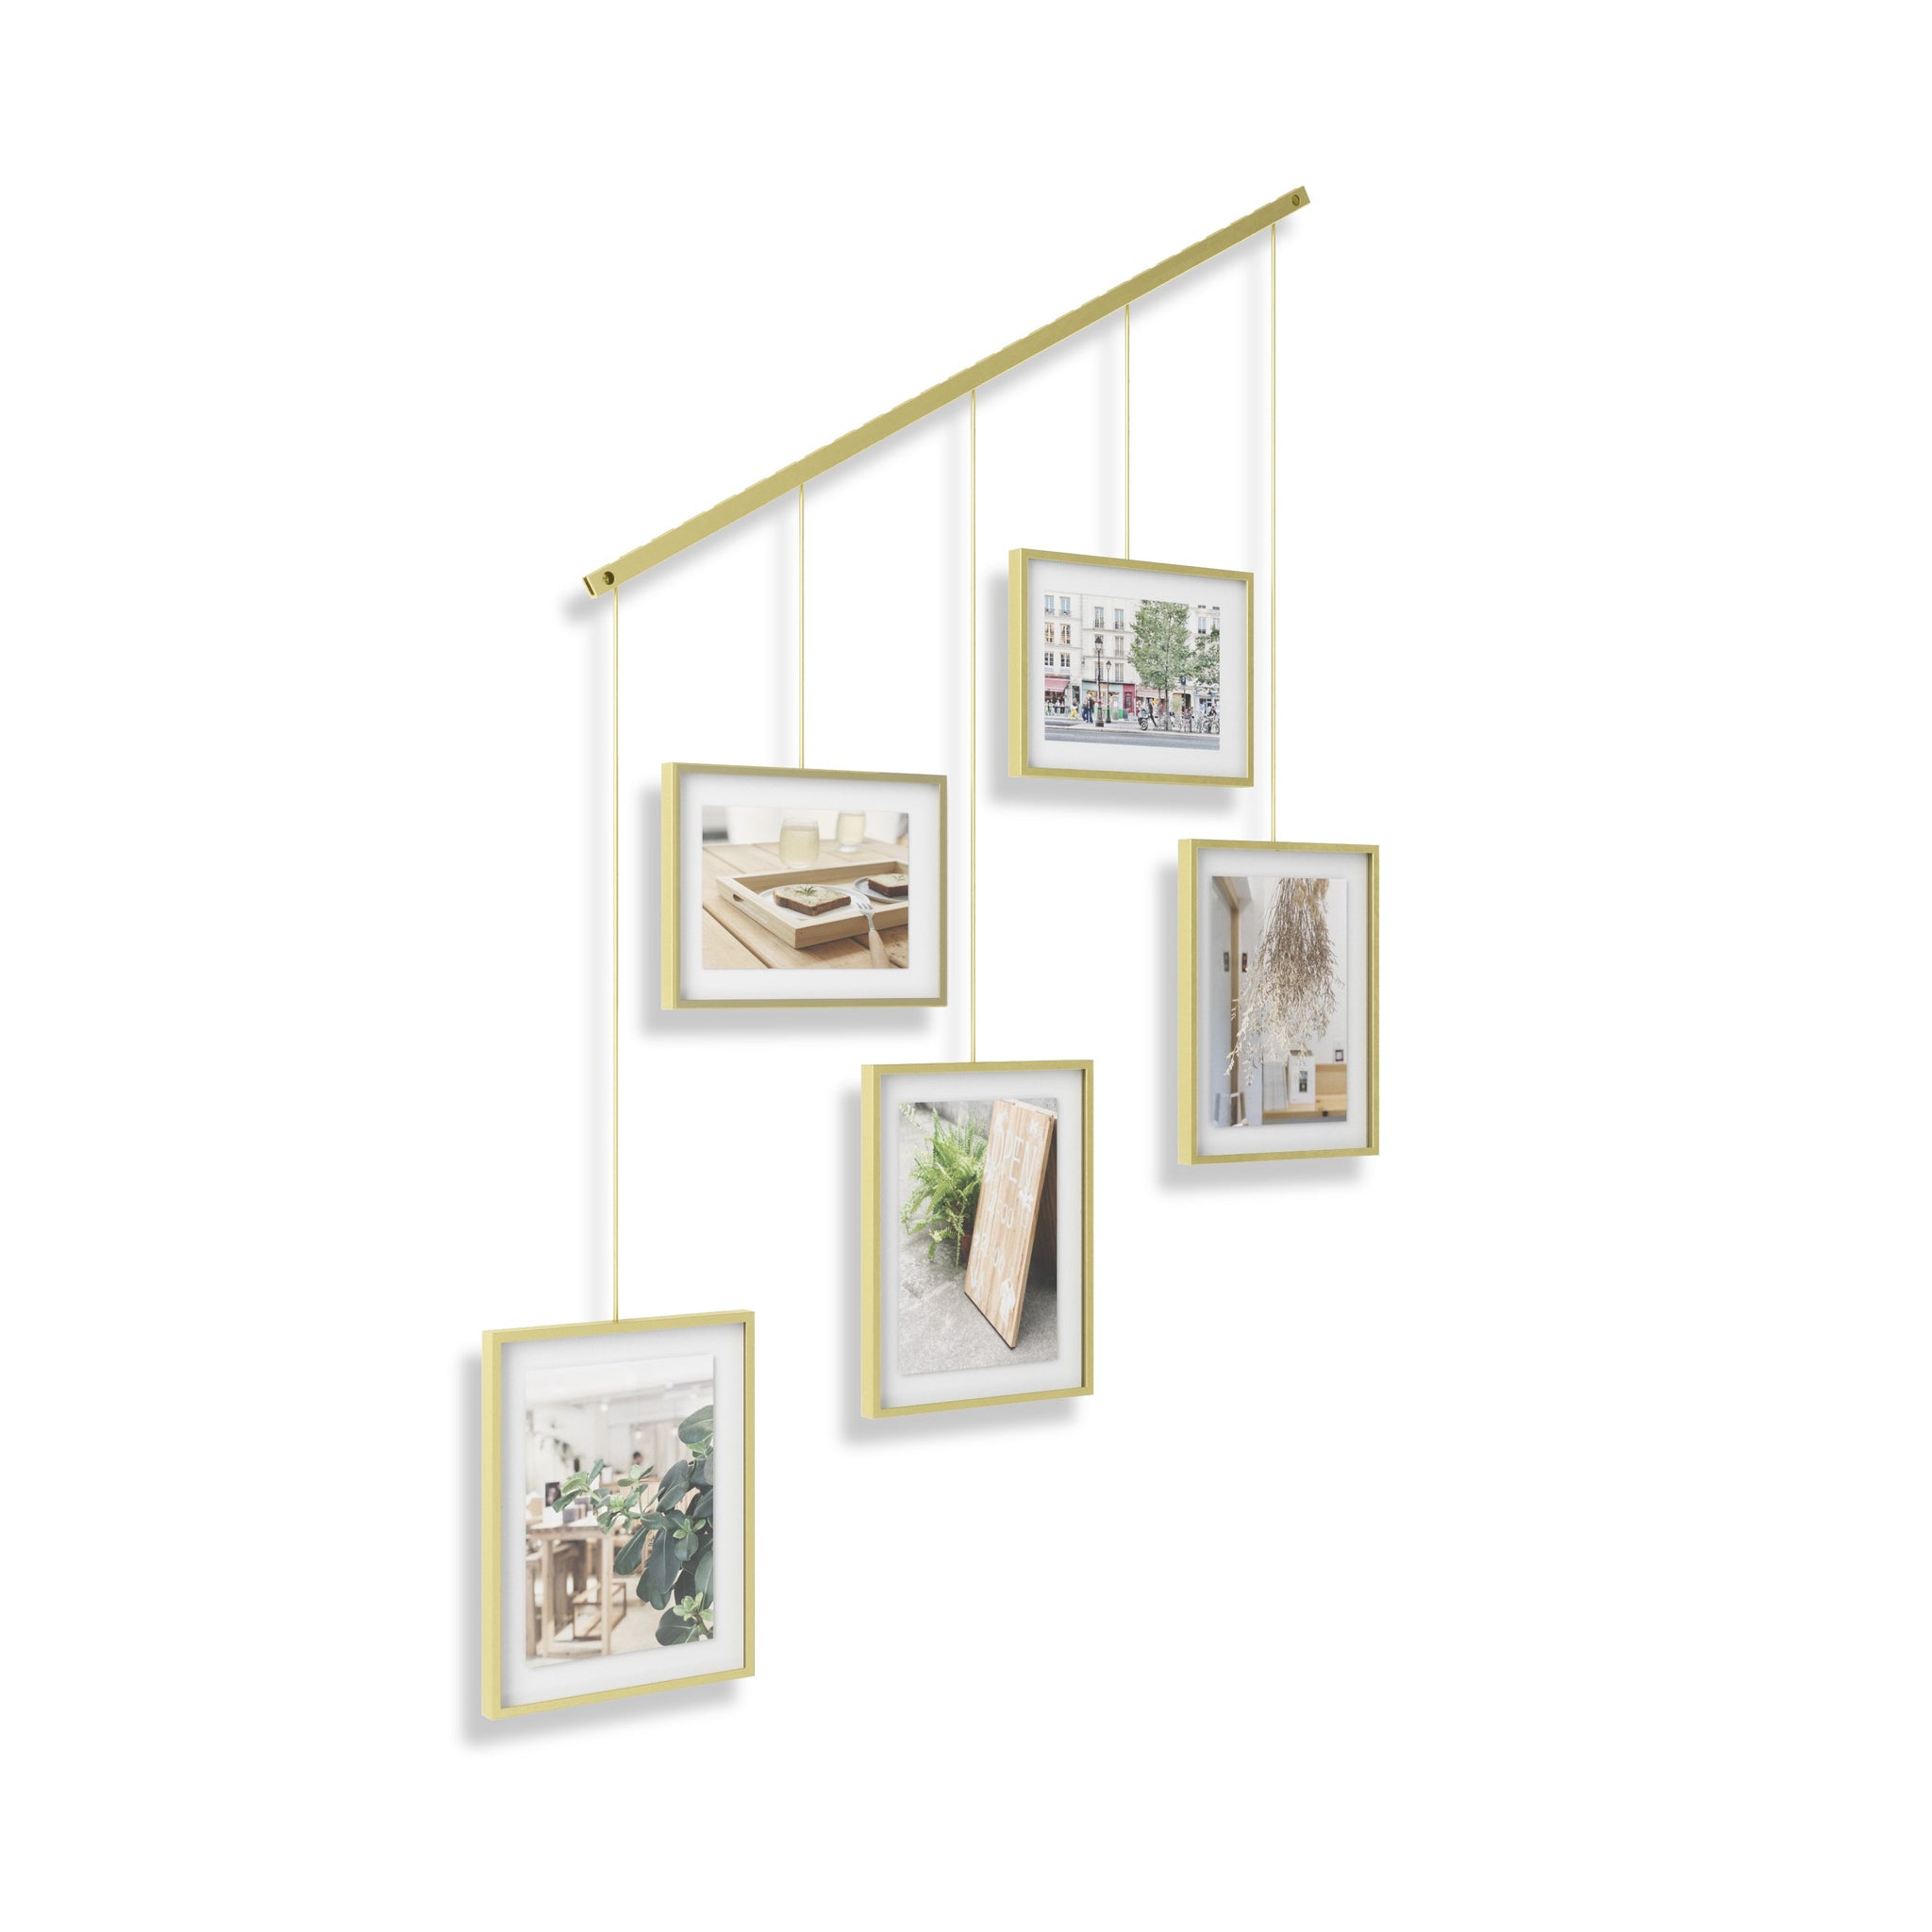 Exhibit Gallery Picture Frame Set